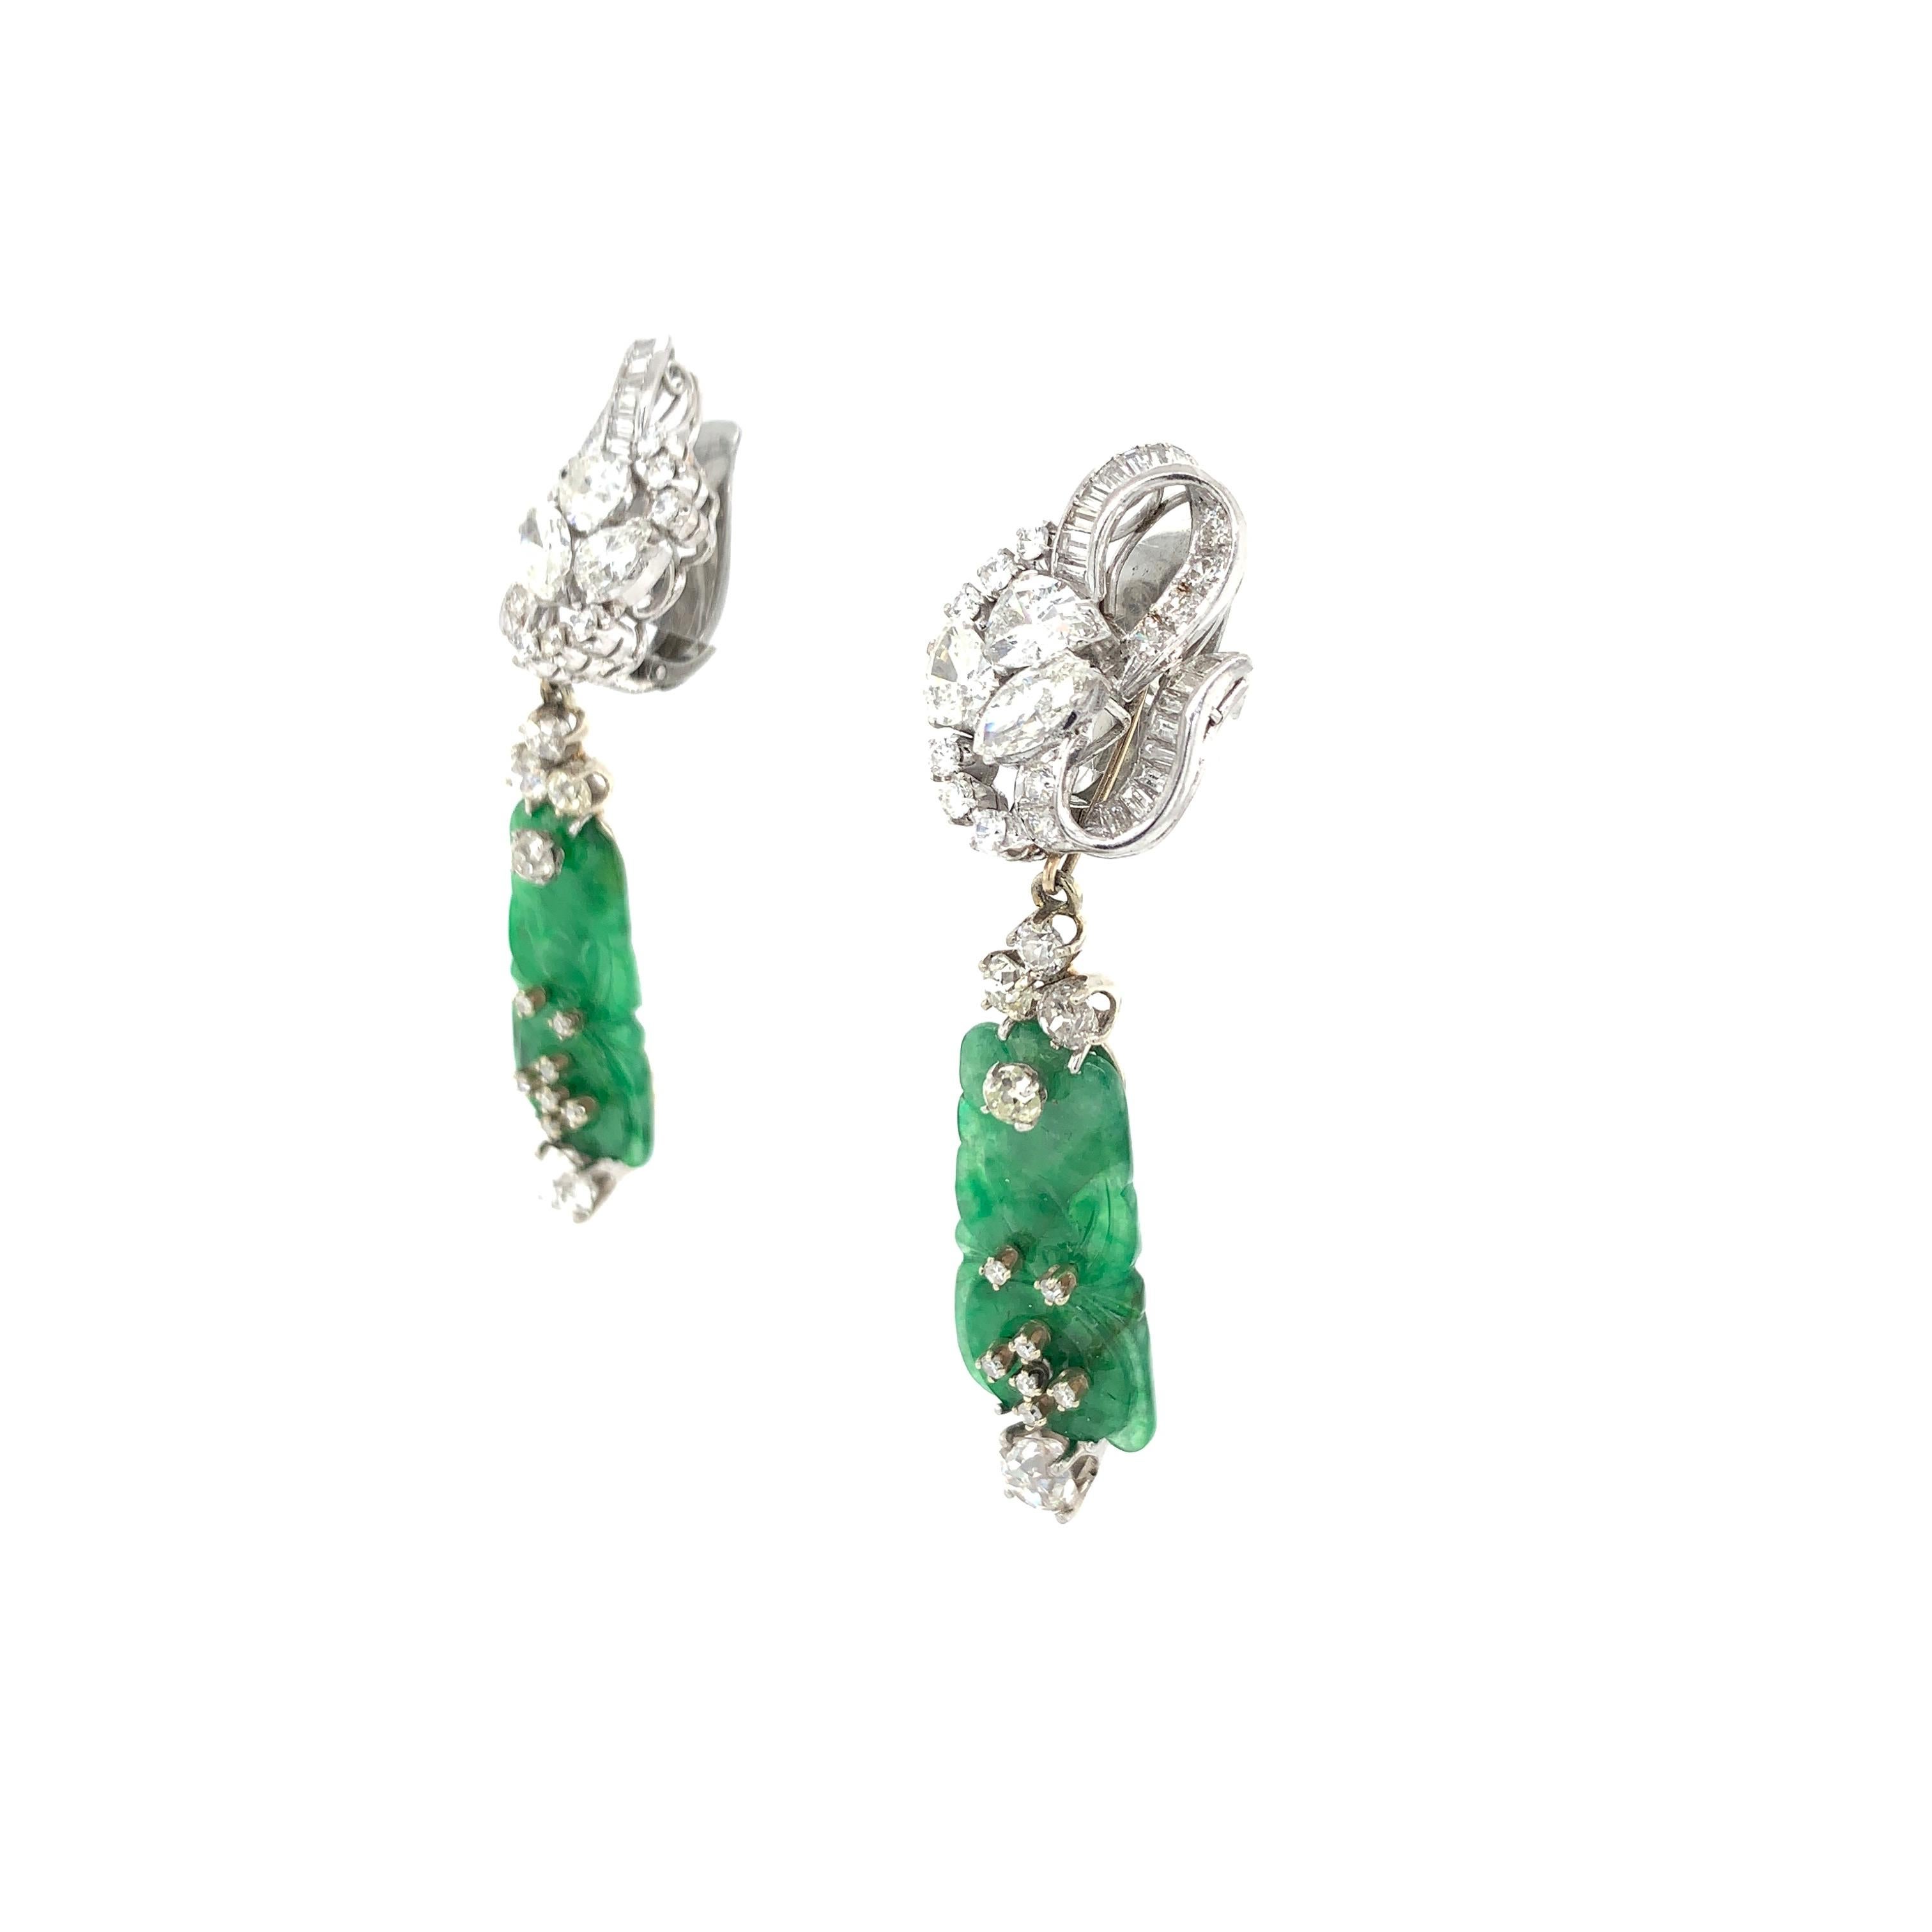 The floral ribbon surmounts set with pear-shaped, marquise-cut, baguette-cut and round diamonds, suspending a pair of elongated carved jadeite plaques measuring 25.5 x 13.5 x 2.5 mm, with bat motifs accented by old mine-cut and round diamonds, the